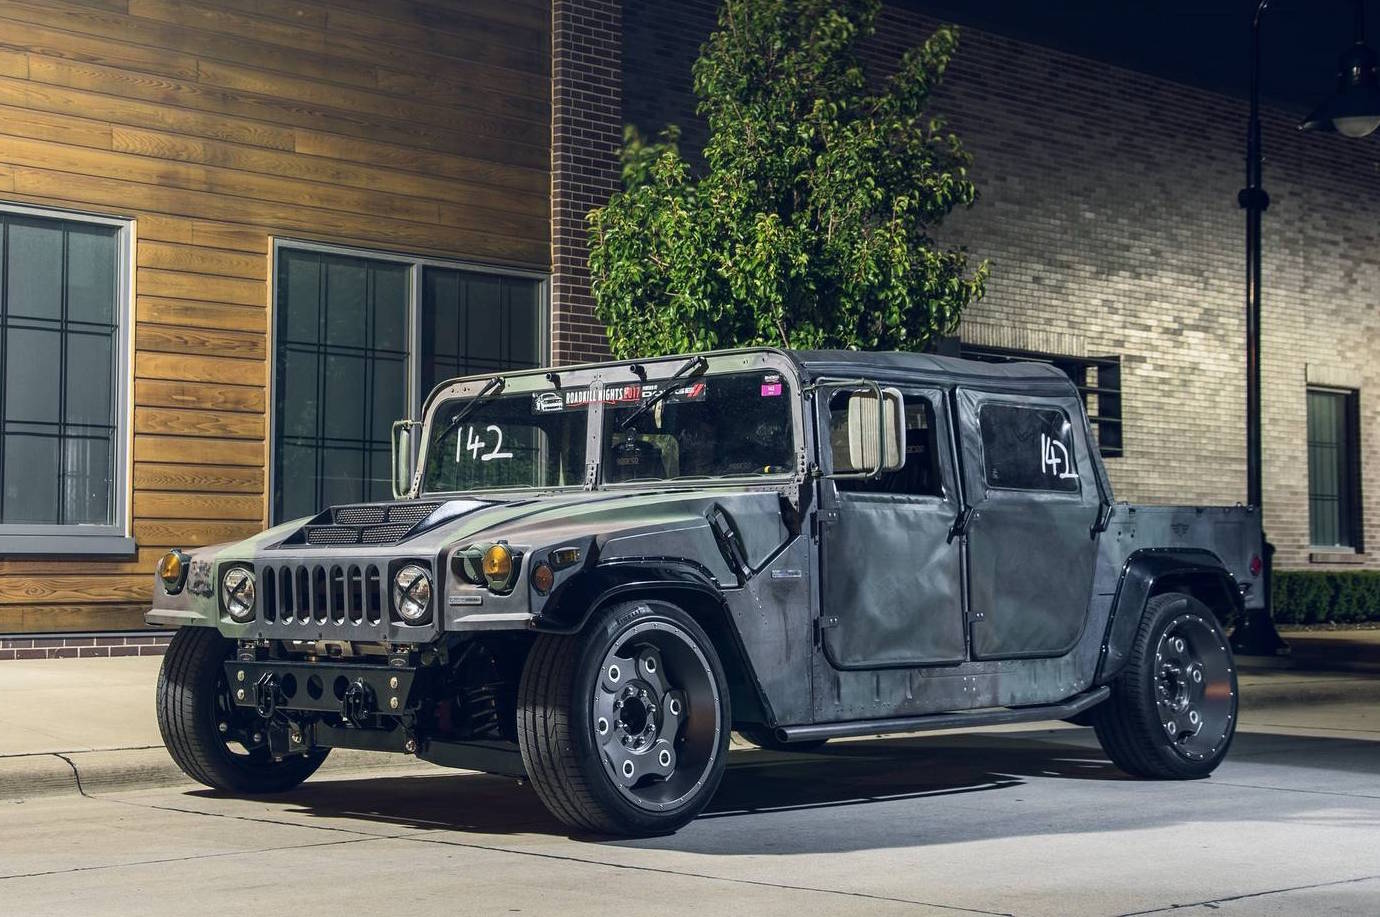 Mil-Spec Hummer H1 is ready for the track… wait, what?